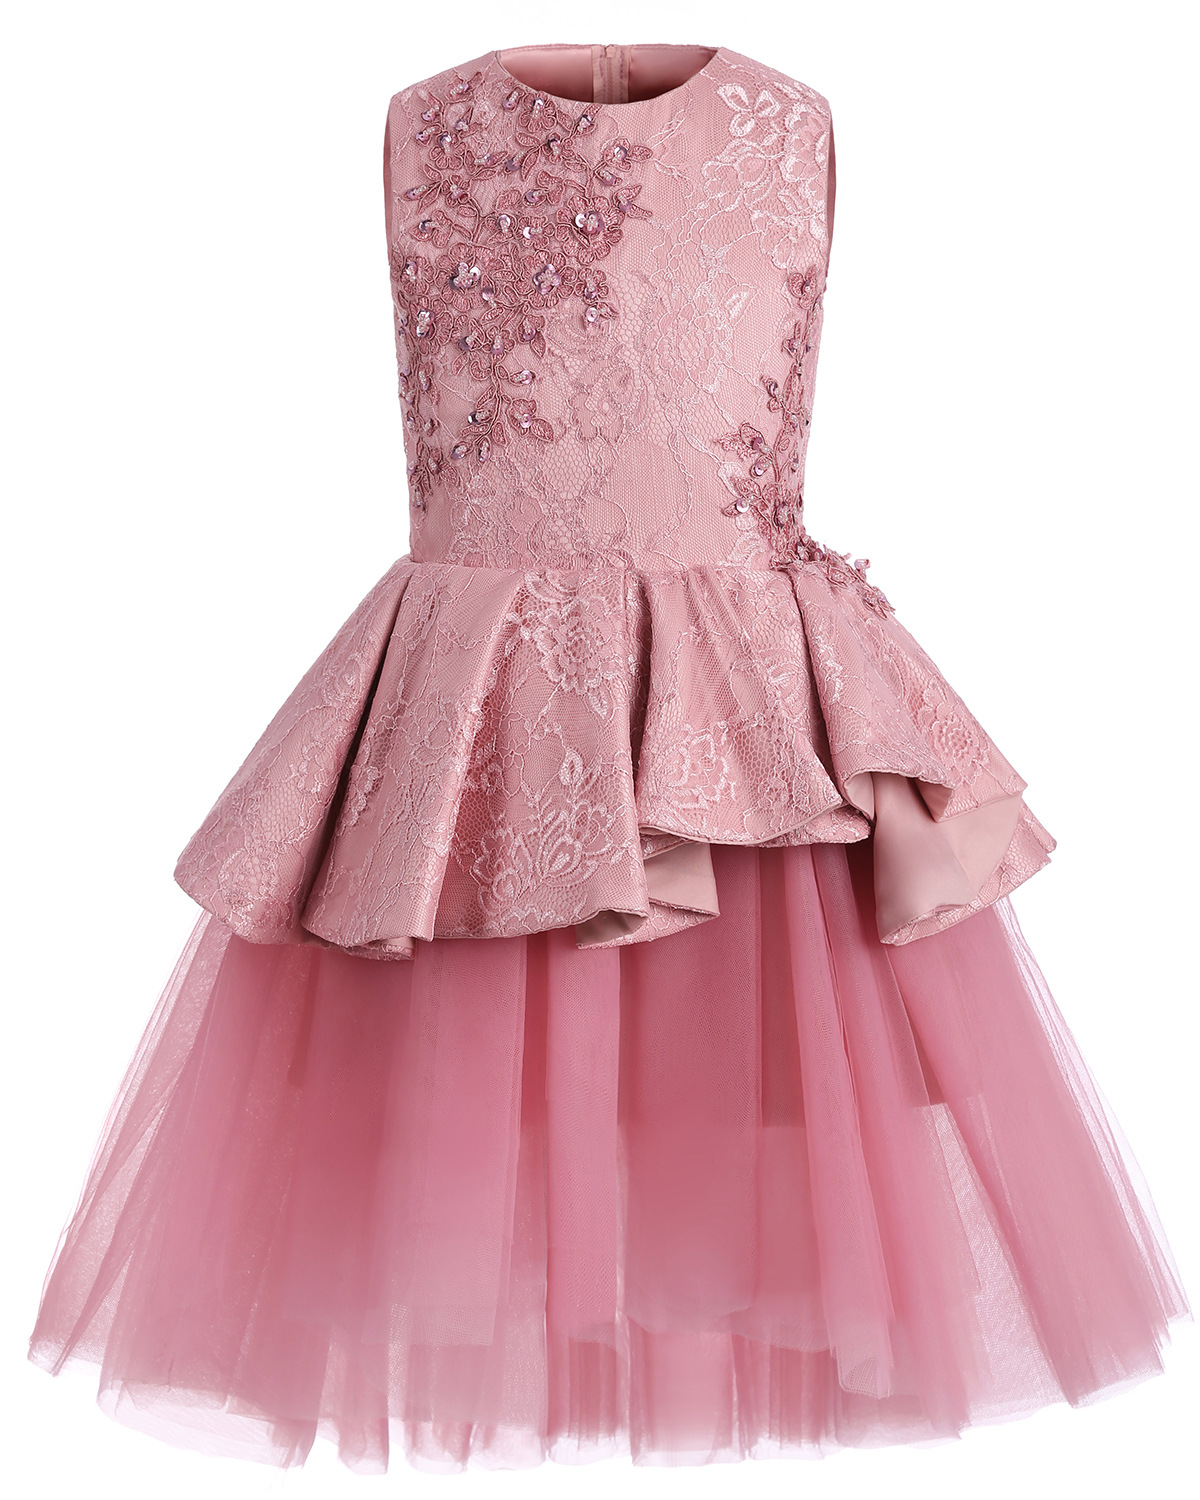 Pink Lace Flower Girl Dress For Wedding 2021 A Line Formal Toddlers ...